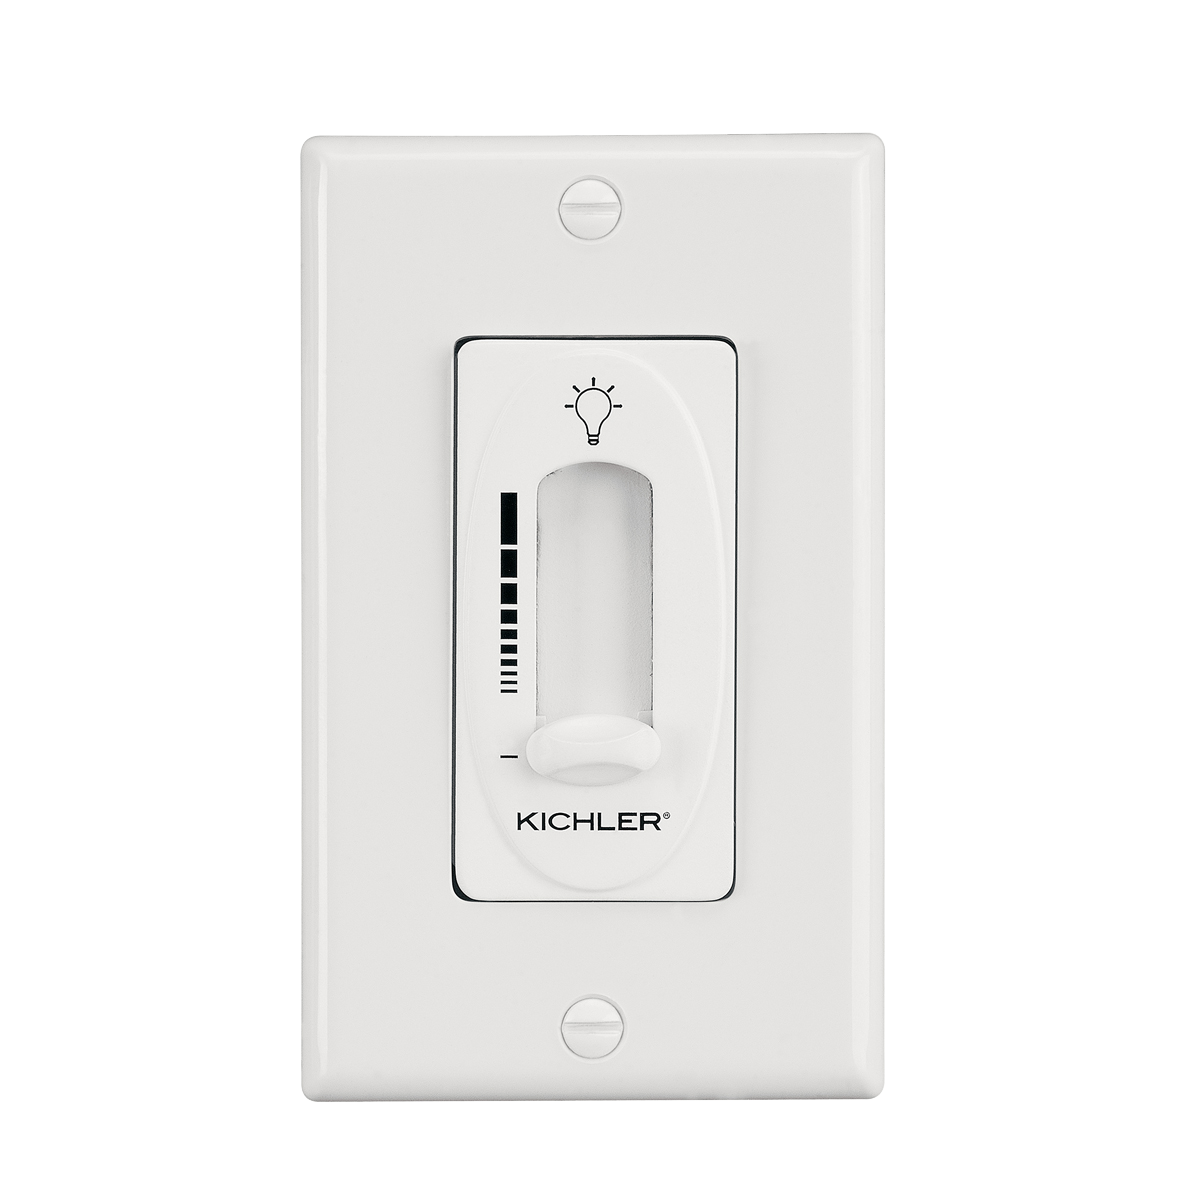 A lighting support necessity, this fan light dimmer control features a classic White finish.